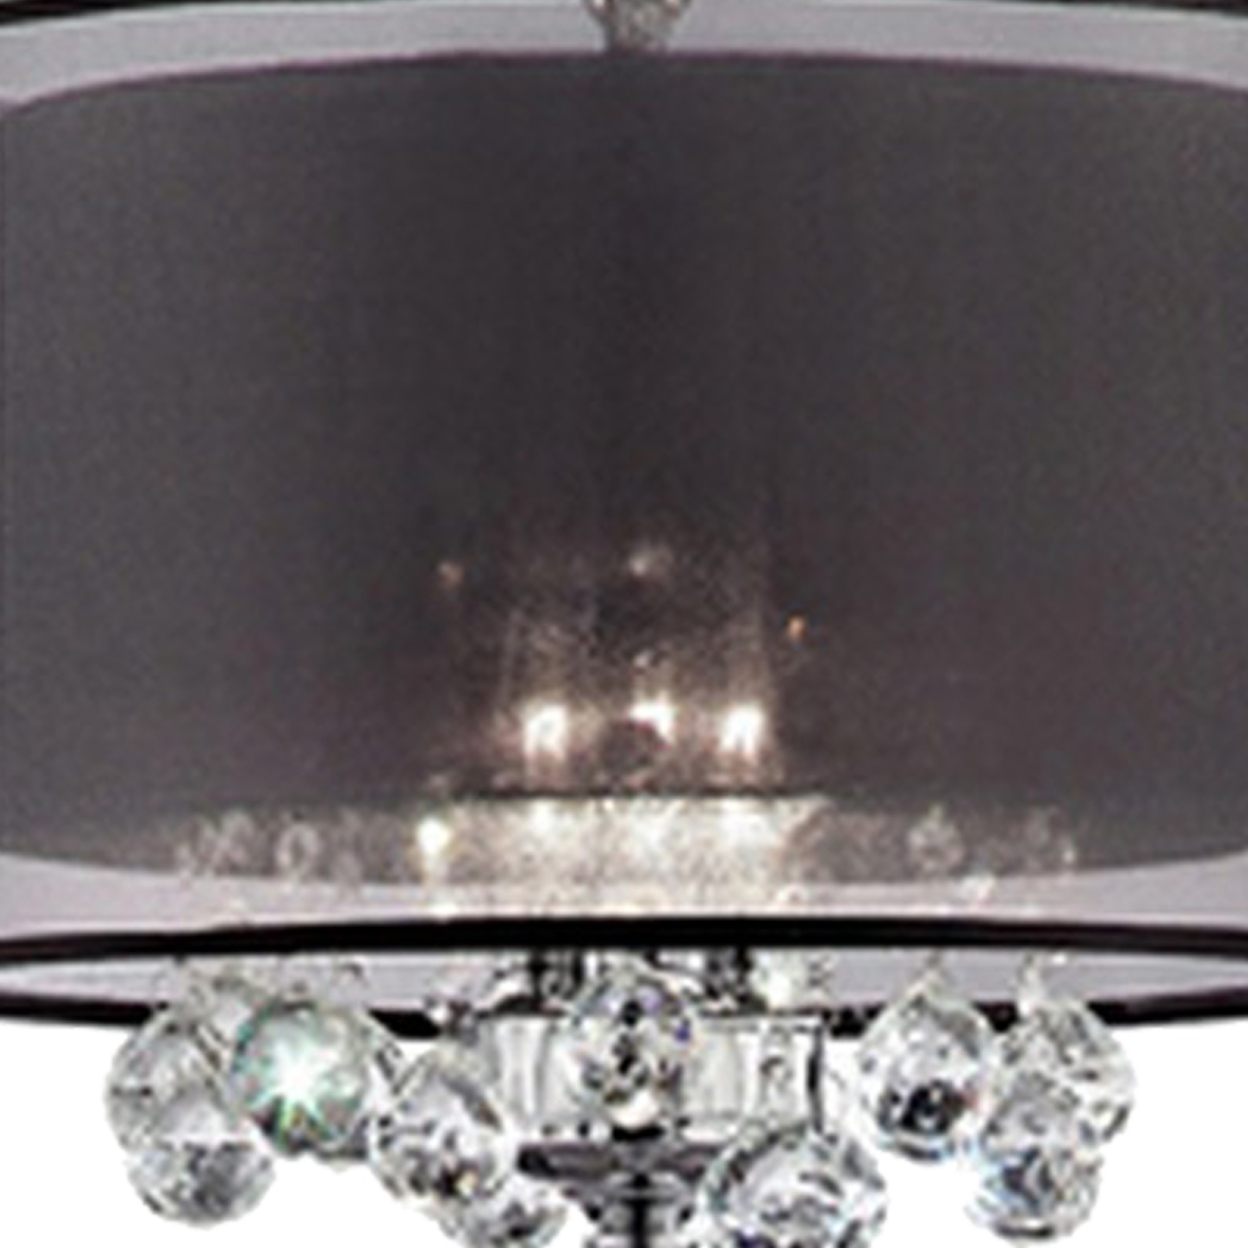 Twisted Crystal Accent Floor Lamp With Dual Fabric Shade, Clear And Black- Saltoro Sherpi